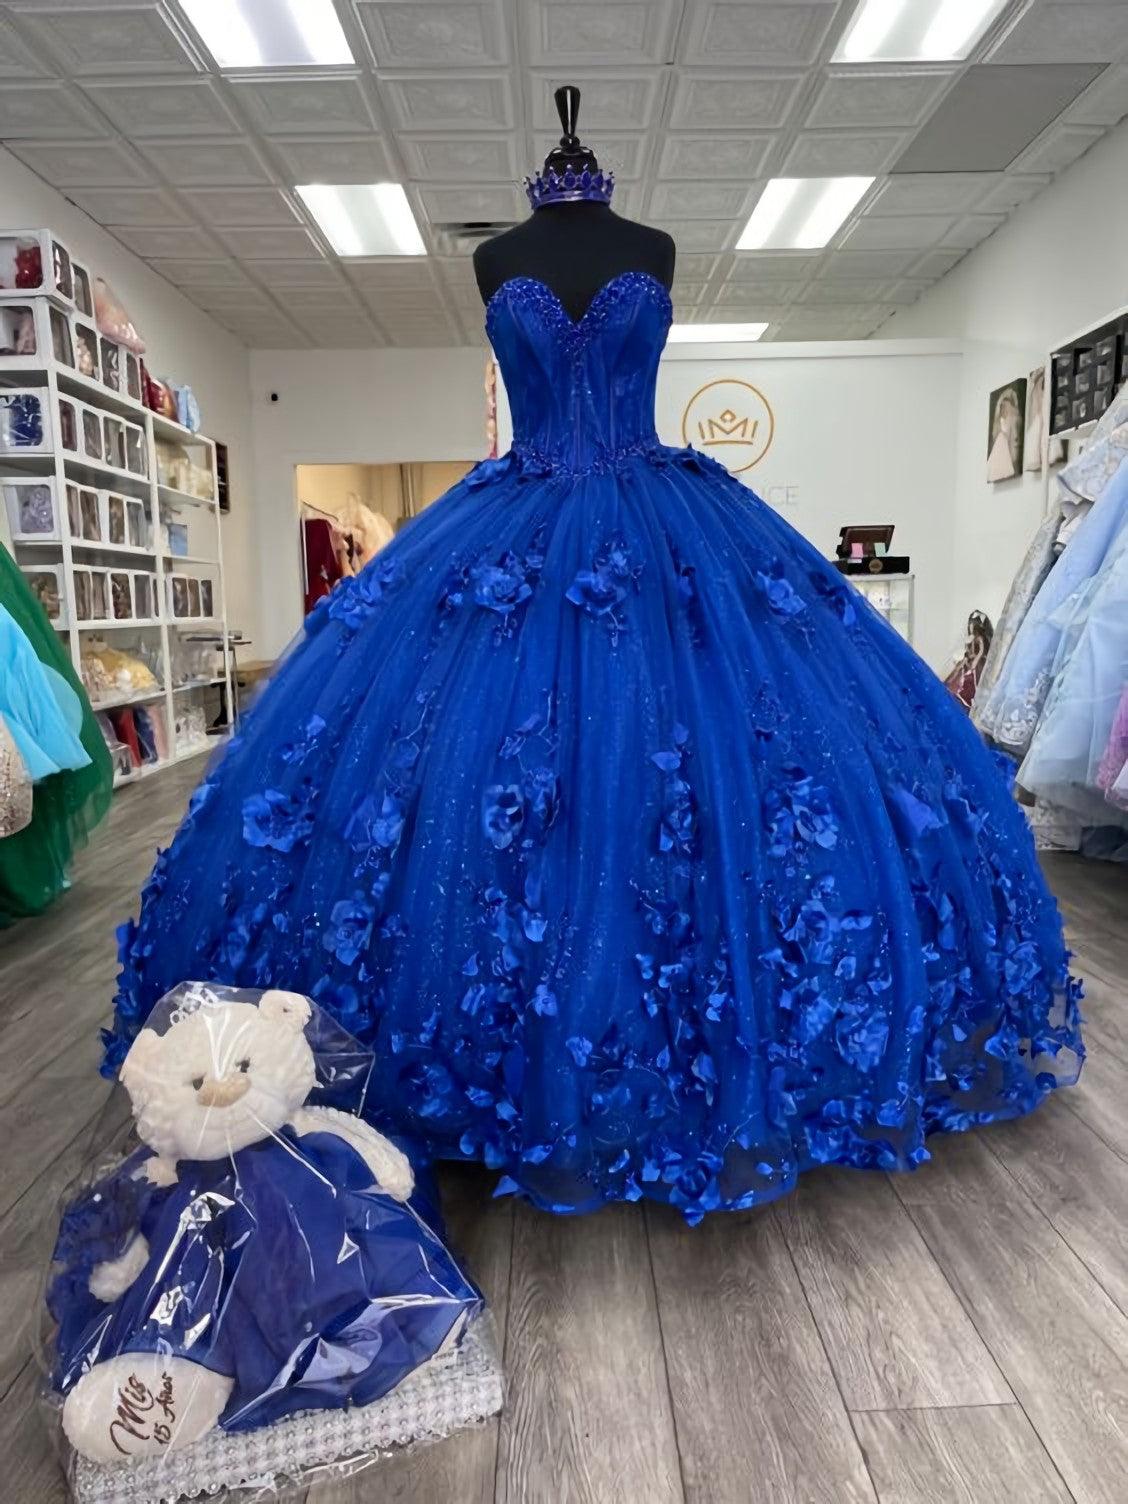 Party Dresses For Teenage Girl, Royal Blue Quinceanera Dress Ball Gown With Appliques Flowers Princess Sweet 16 Dresses